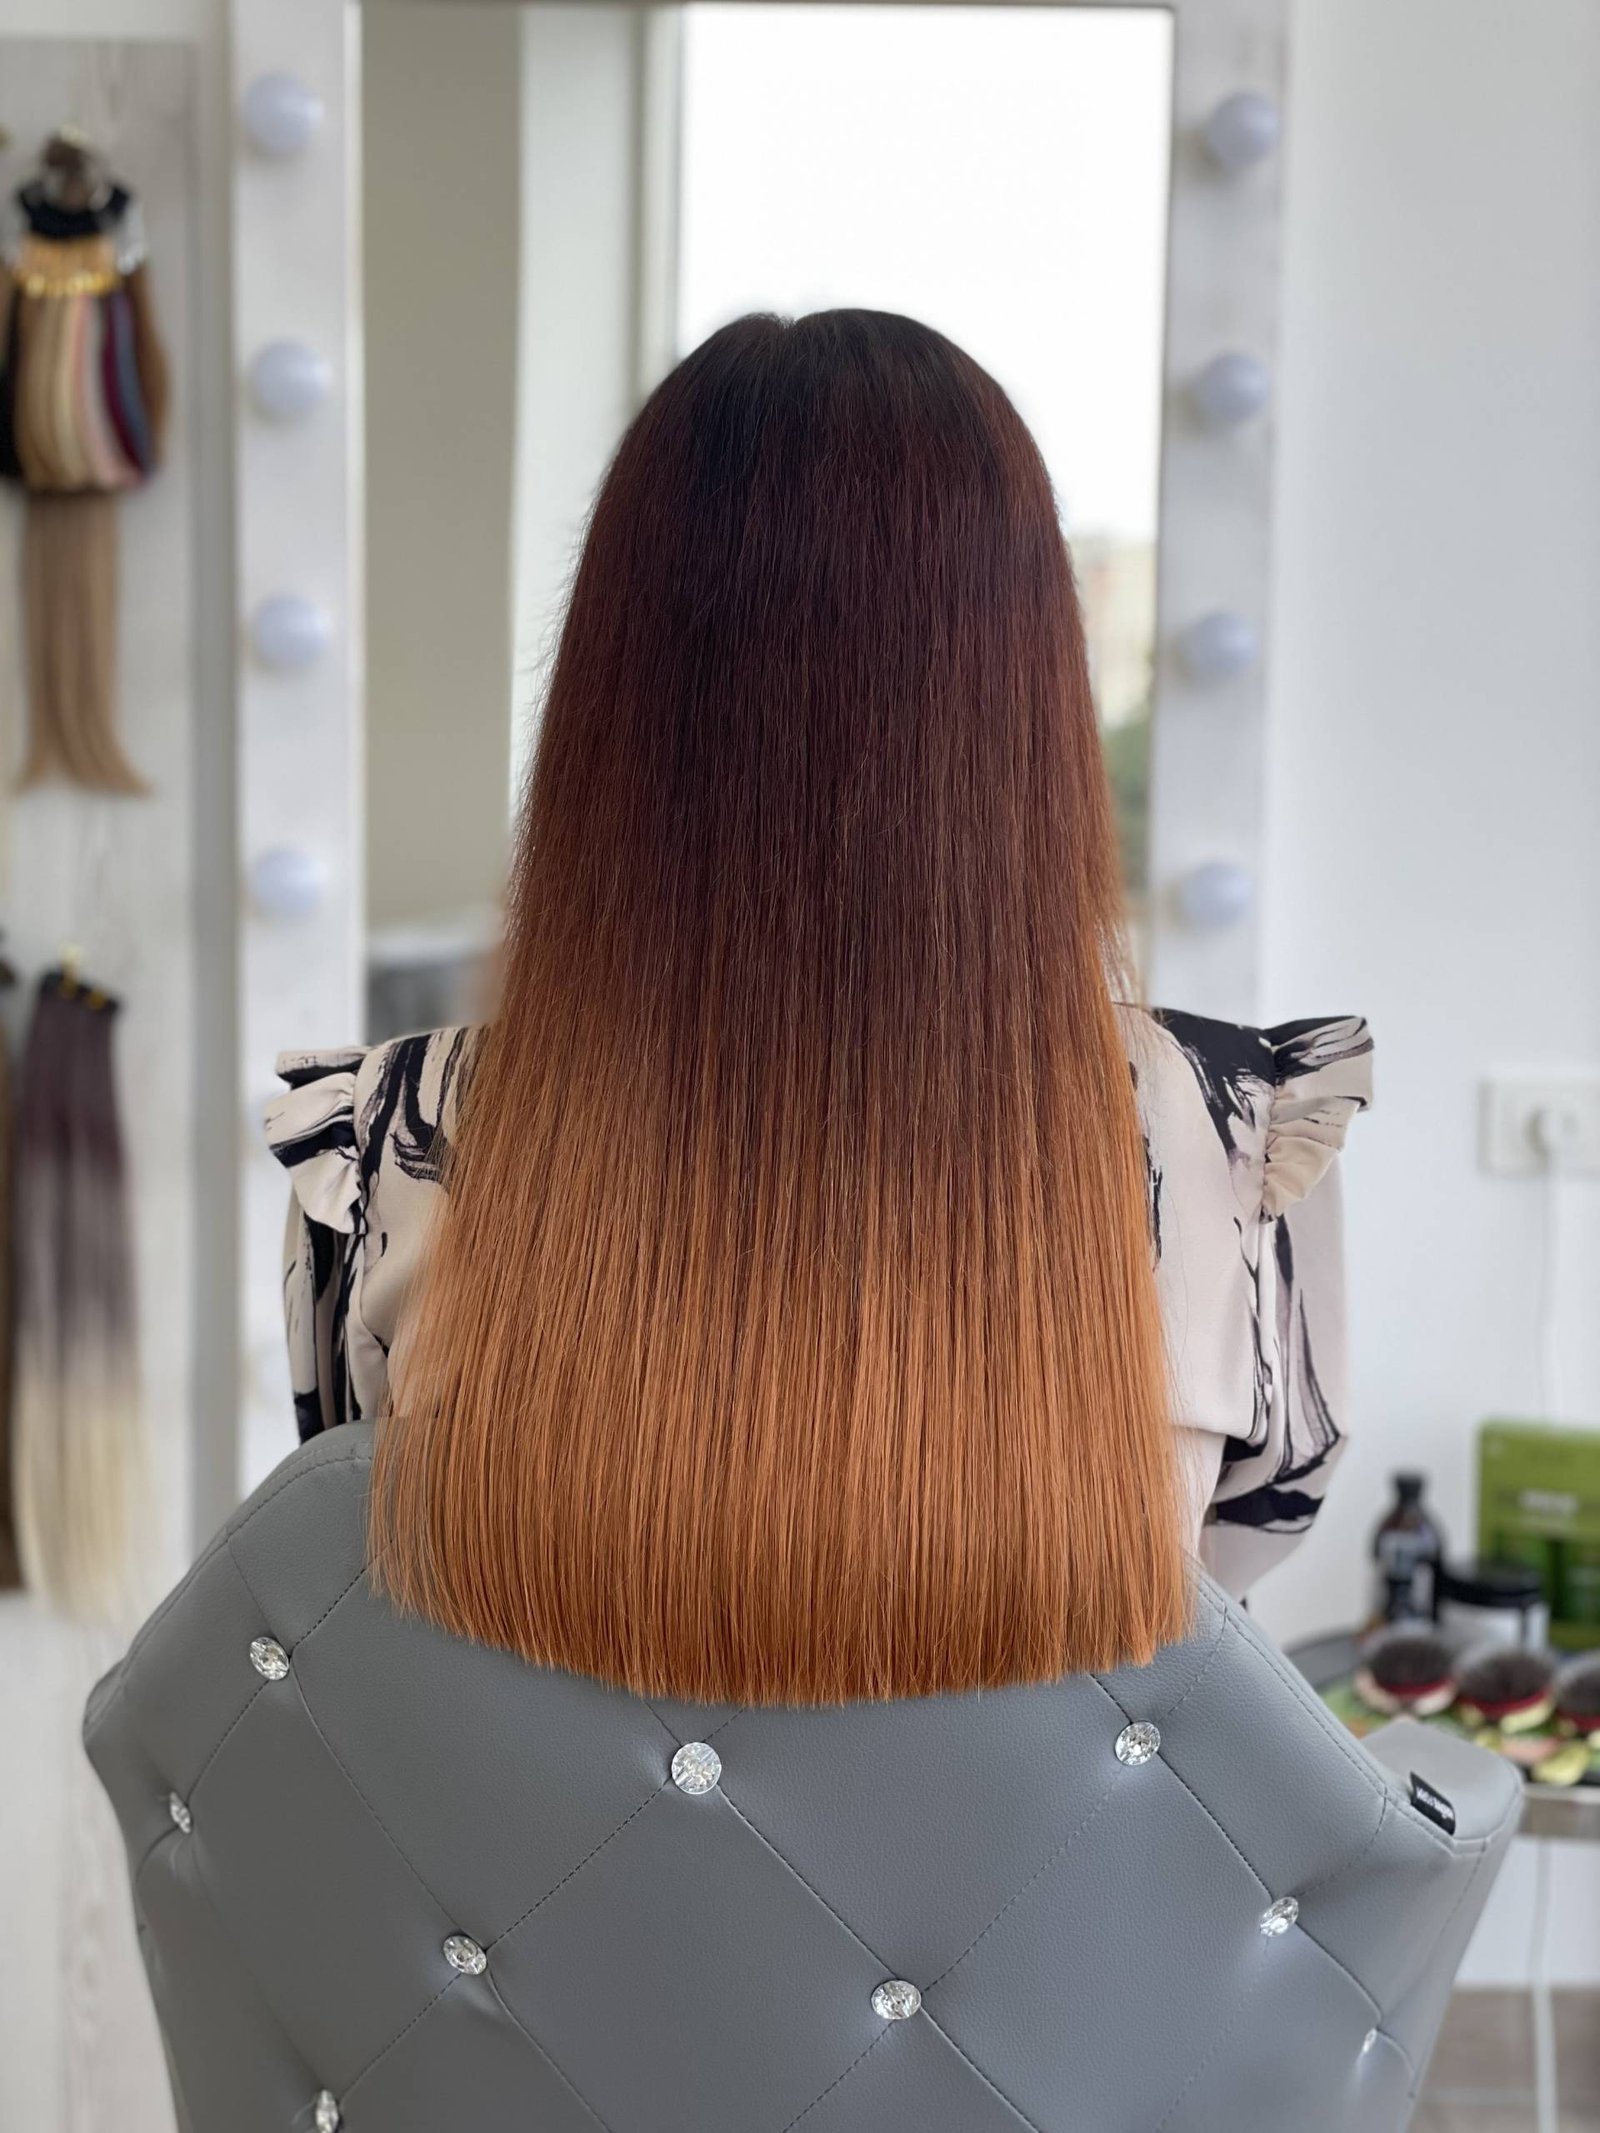 Keratin hair extensions – Ombre effect